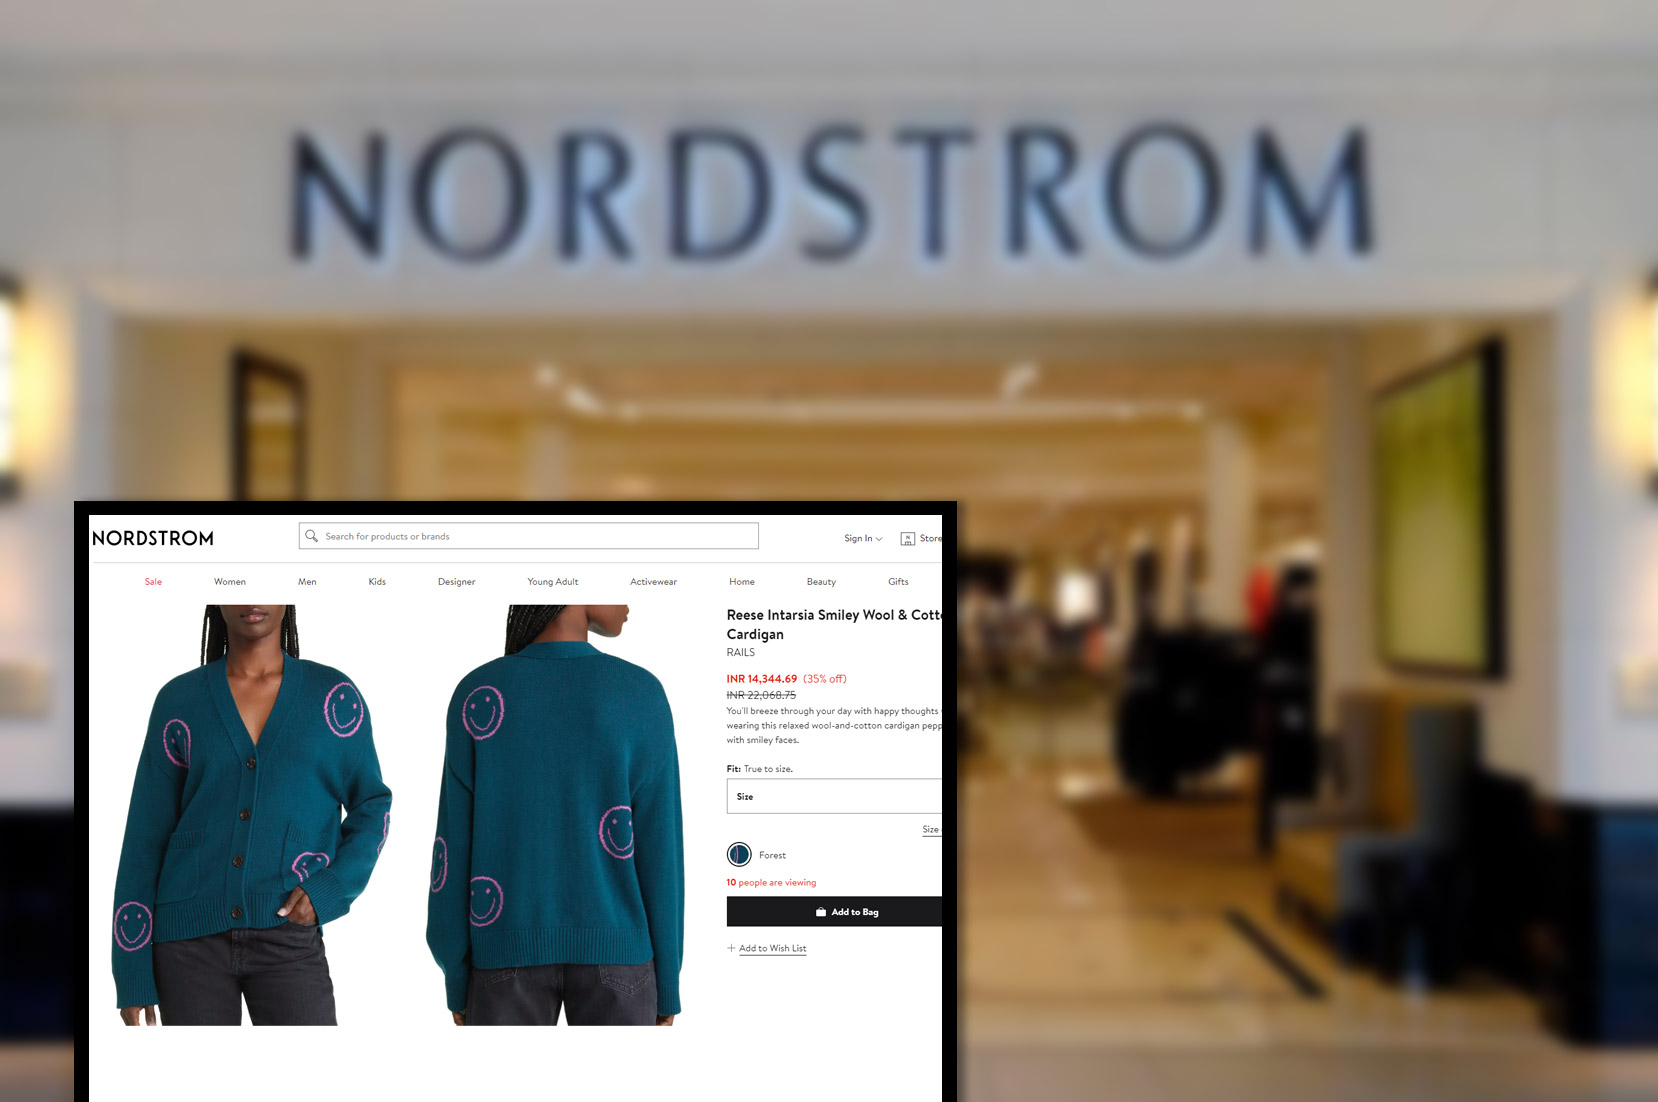 nordstrom-comproduct-pricing-information-and-image-scraping-services